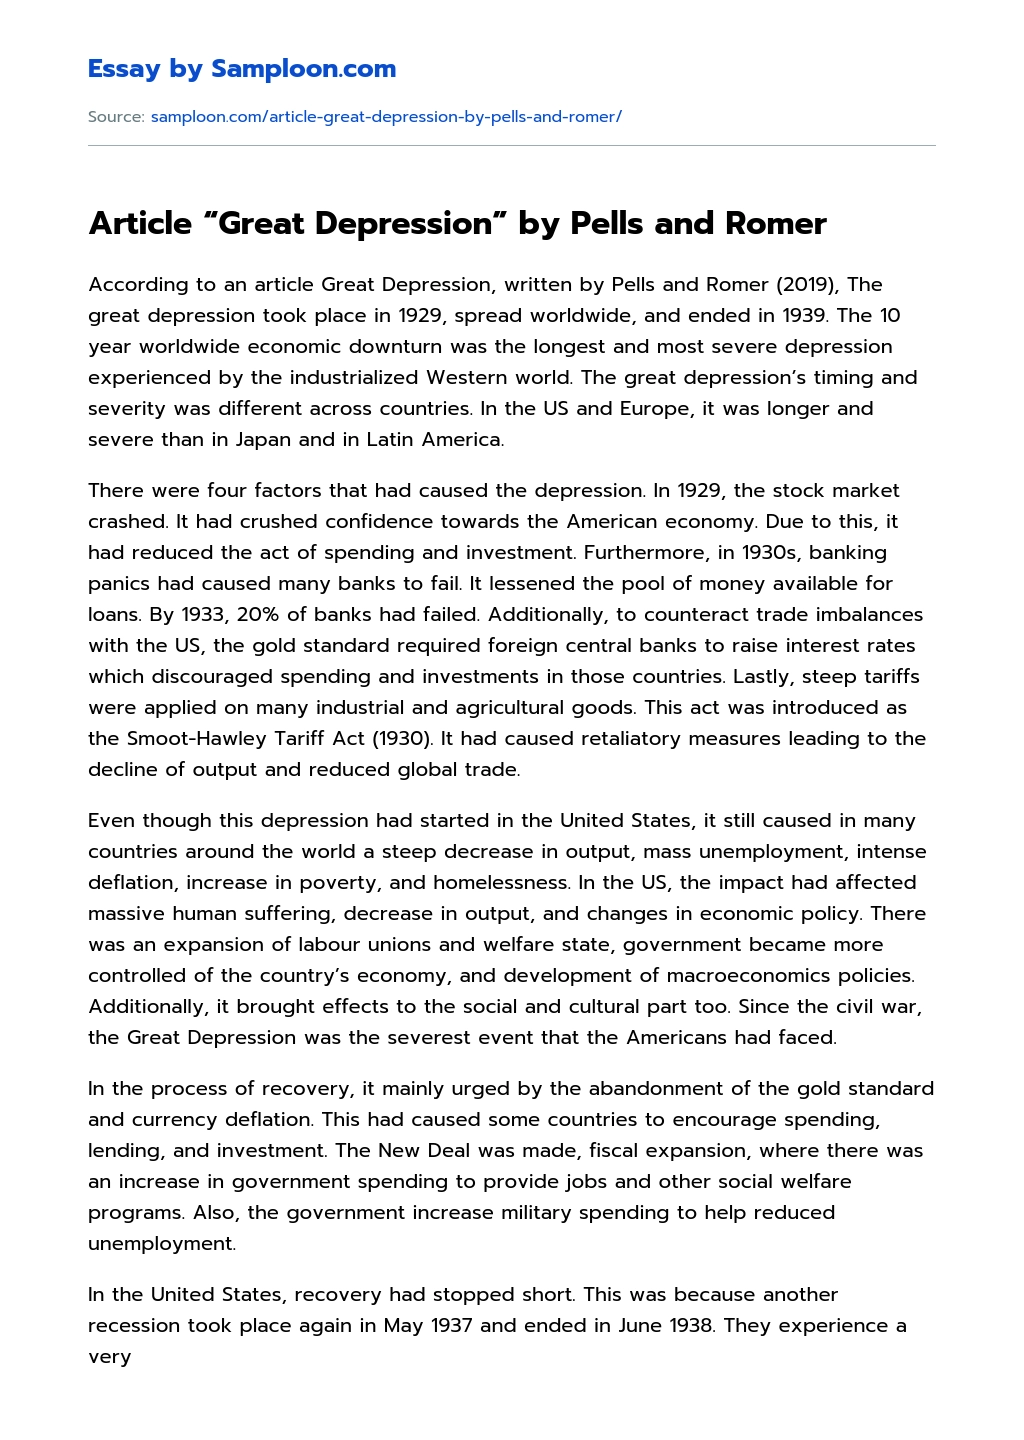 Article “Great Depression” by Pells and Romer Research Paper essay